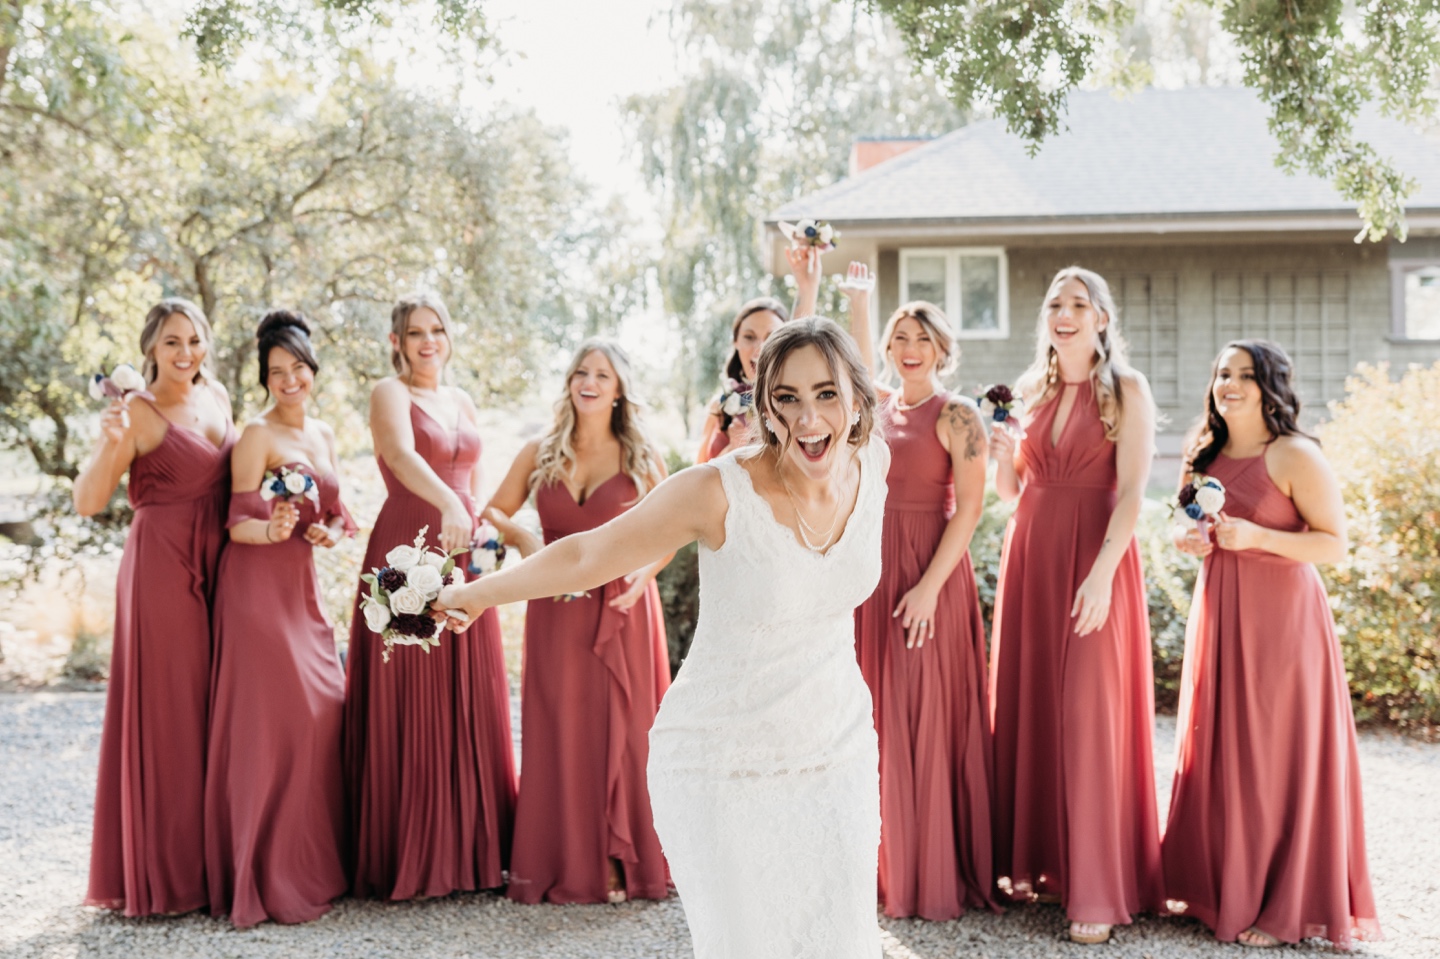 Bride stands and smiles big in front of her bridesmaids who all smile at her in their dark pink bridesmaids dresses. Wedding photography in Sacramento by Liz Koston.